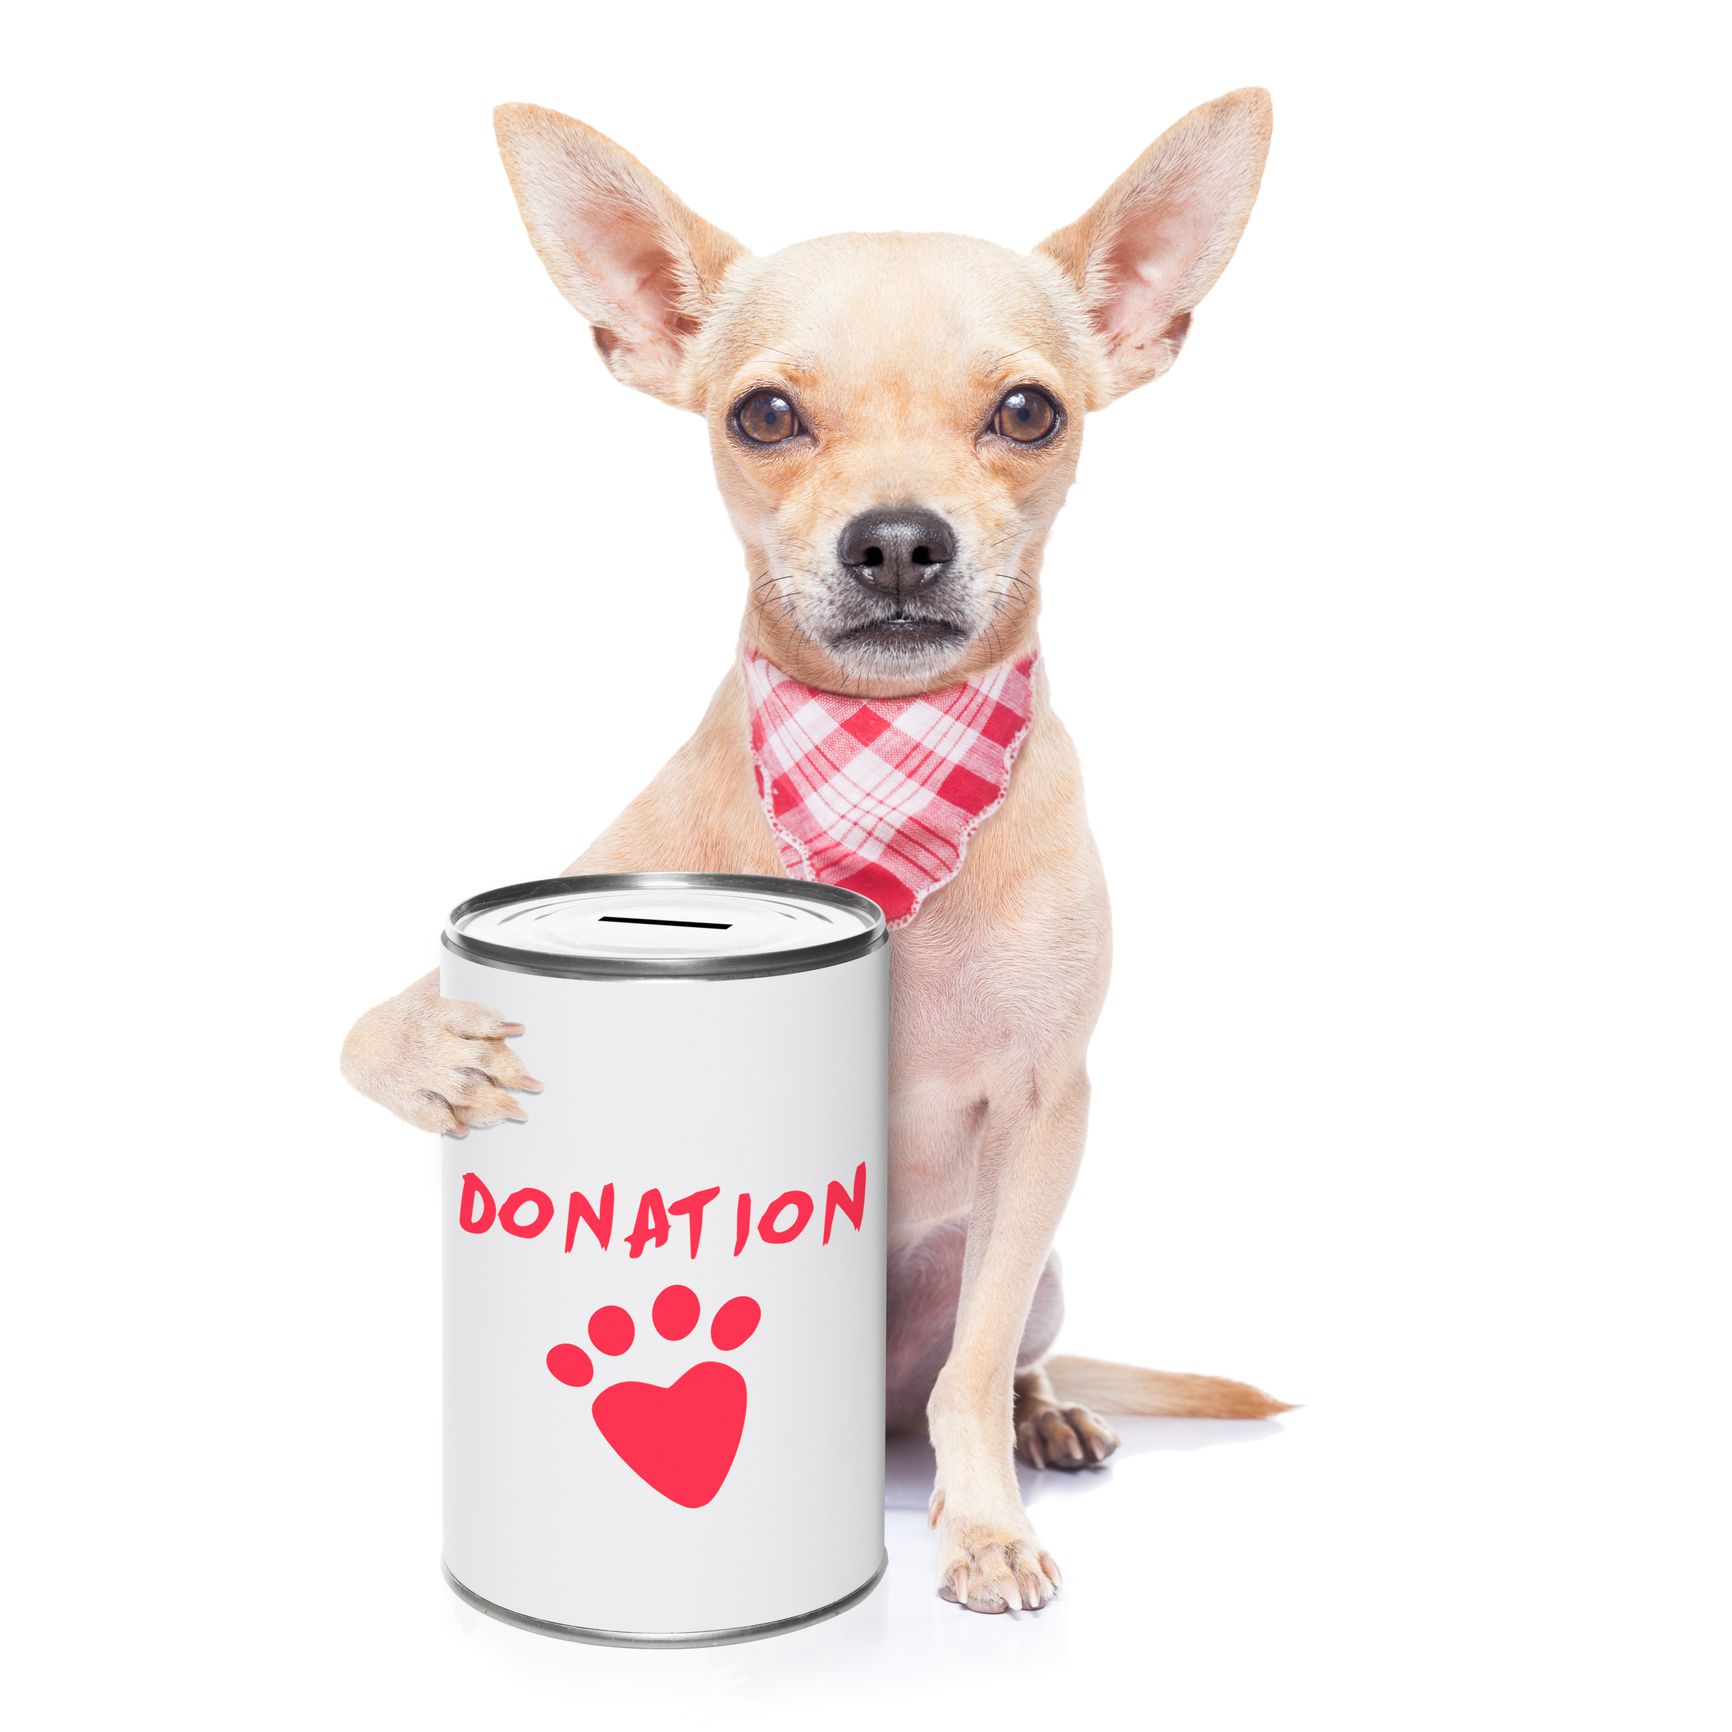 Dog with donation can